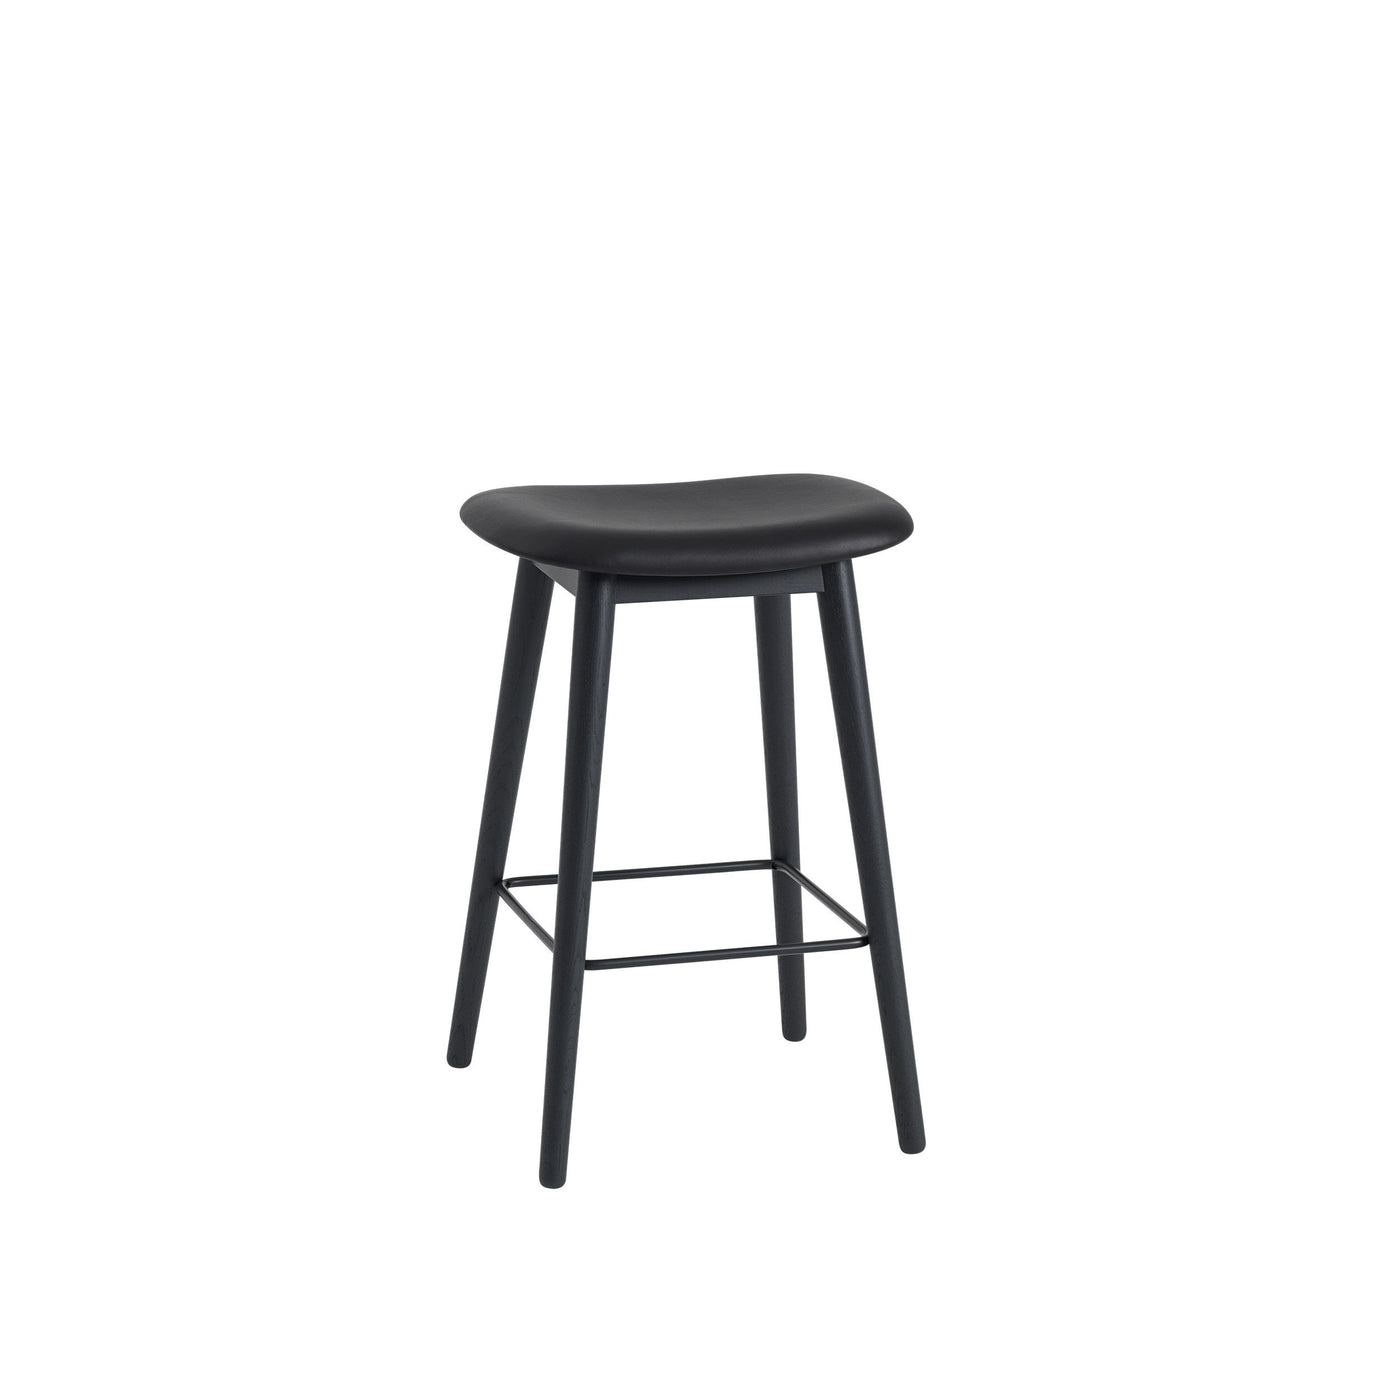 muuto fiber bar stool wood base refine black leather available at someday designs. #colour_black-refine-leather